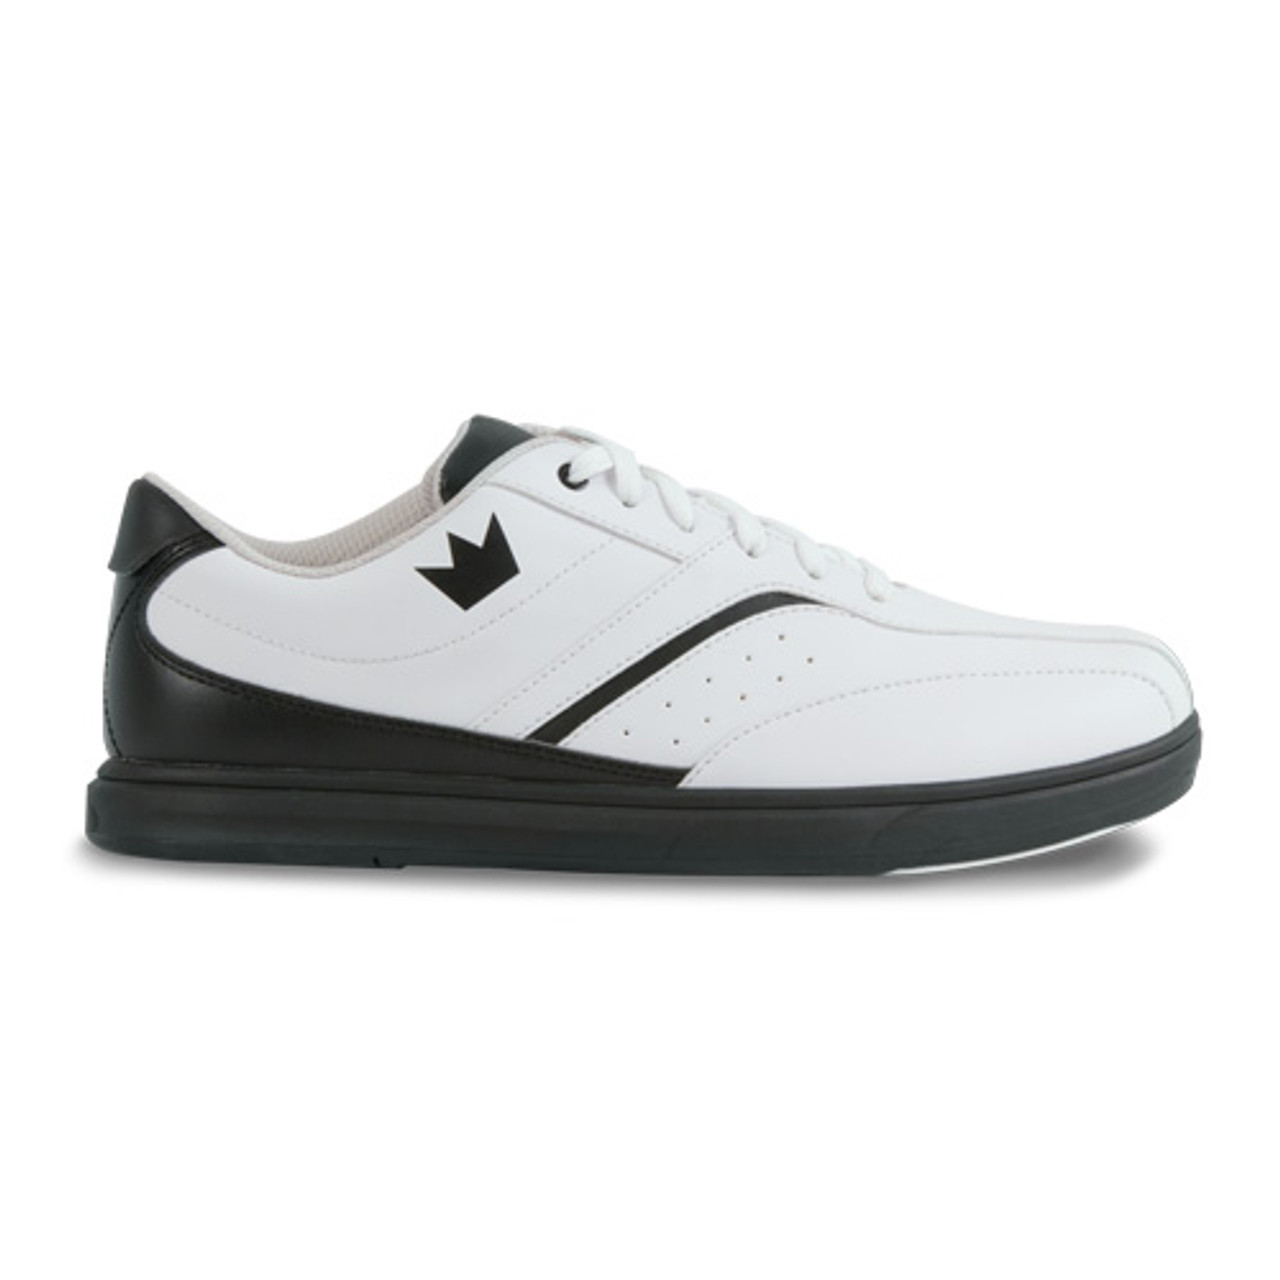 black and white bowling shoes